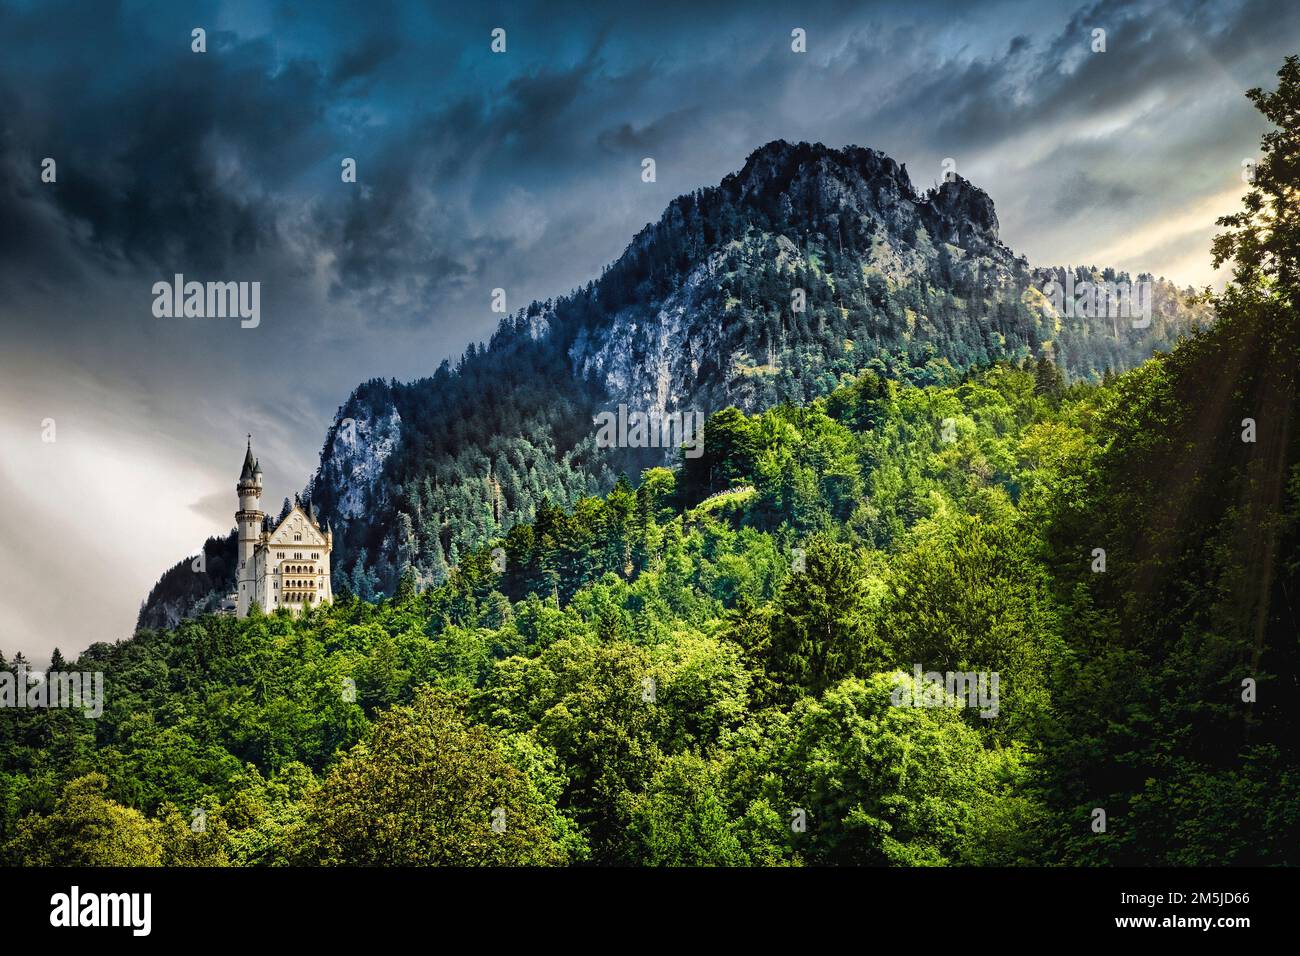 Neuschwanstein Castle stands out against the forest and mountains in Bavaria, Germany. Stock Photo